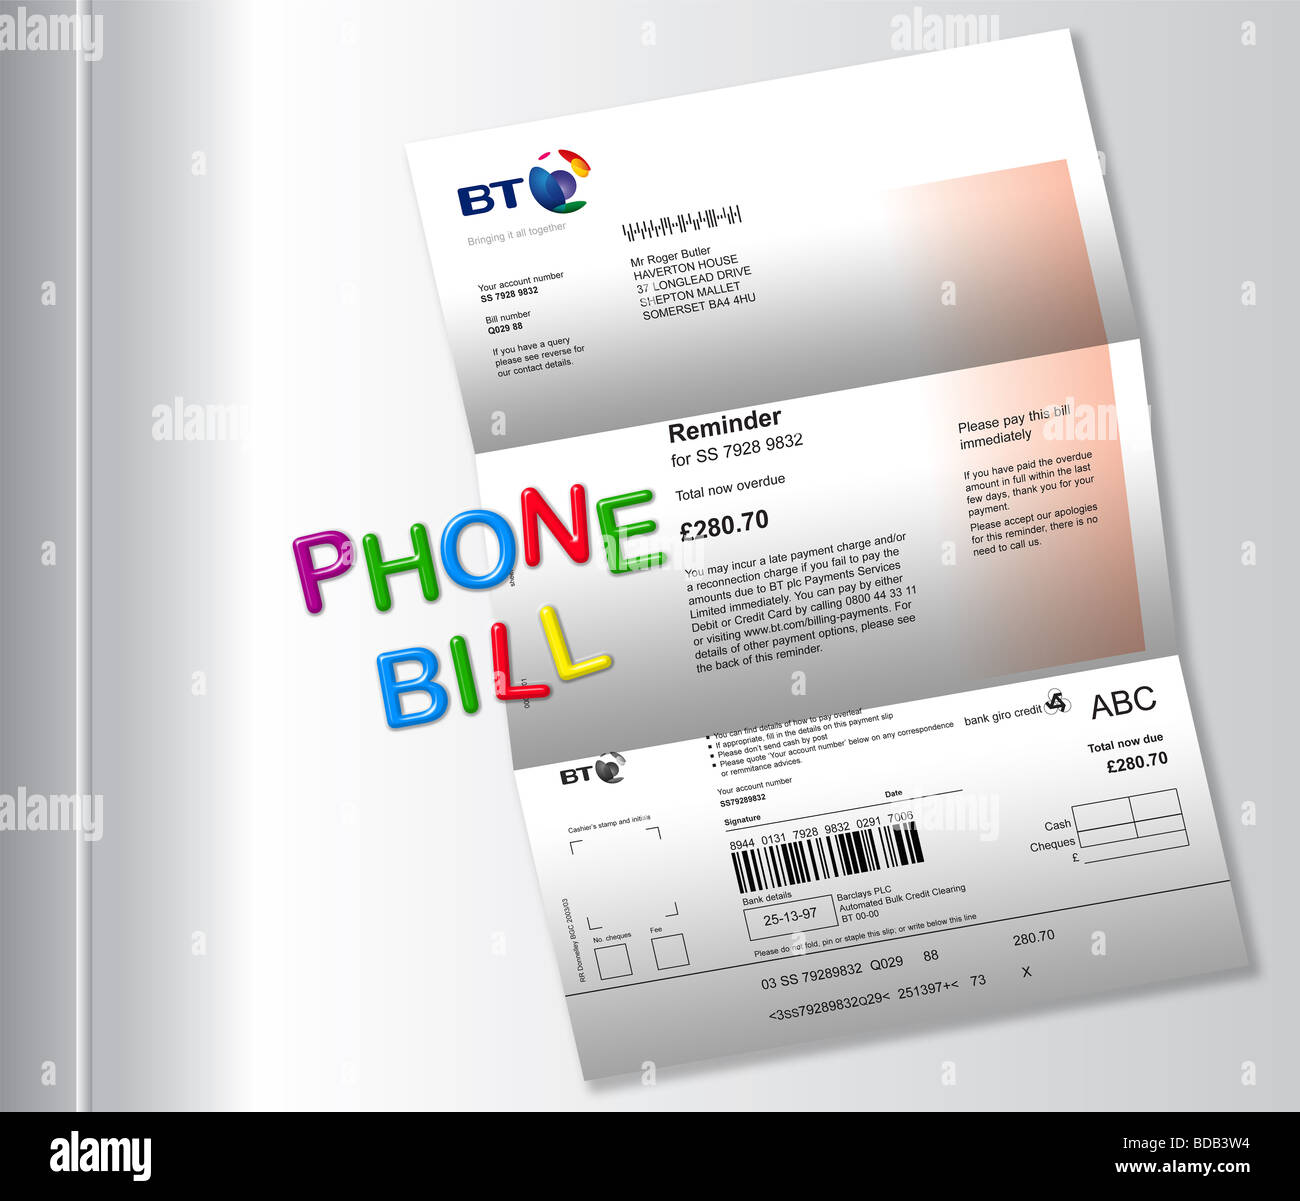 Telephone bill on fridge with ‘PHONE BILL’ spelt out by magnetic fridge letters. Stock Photo